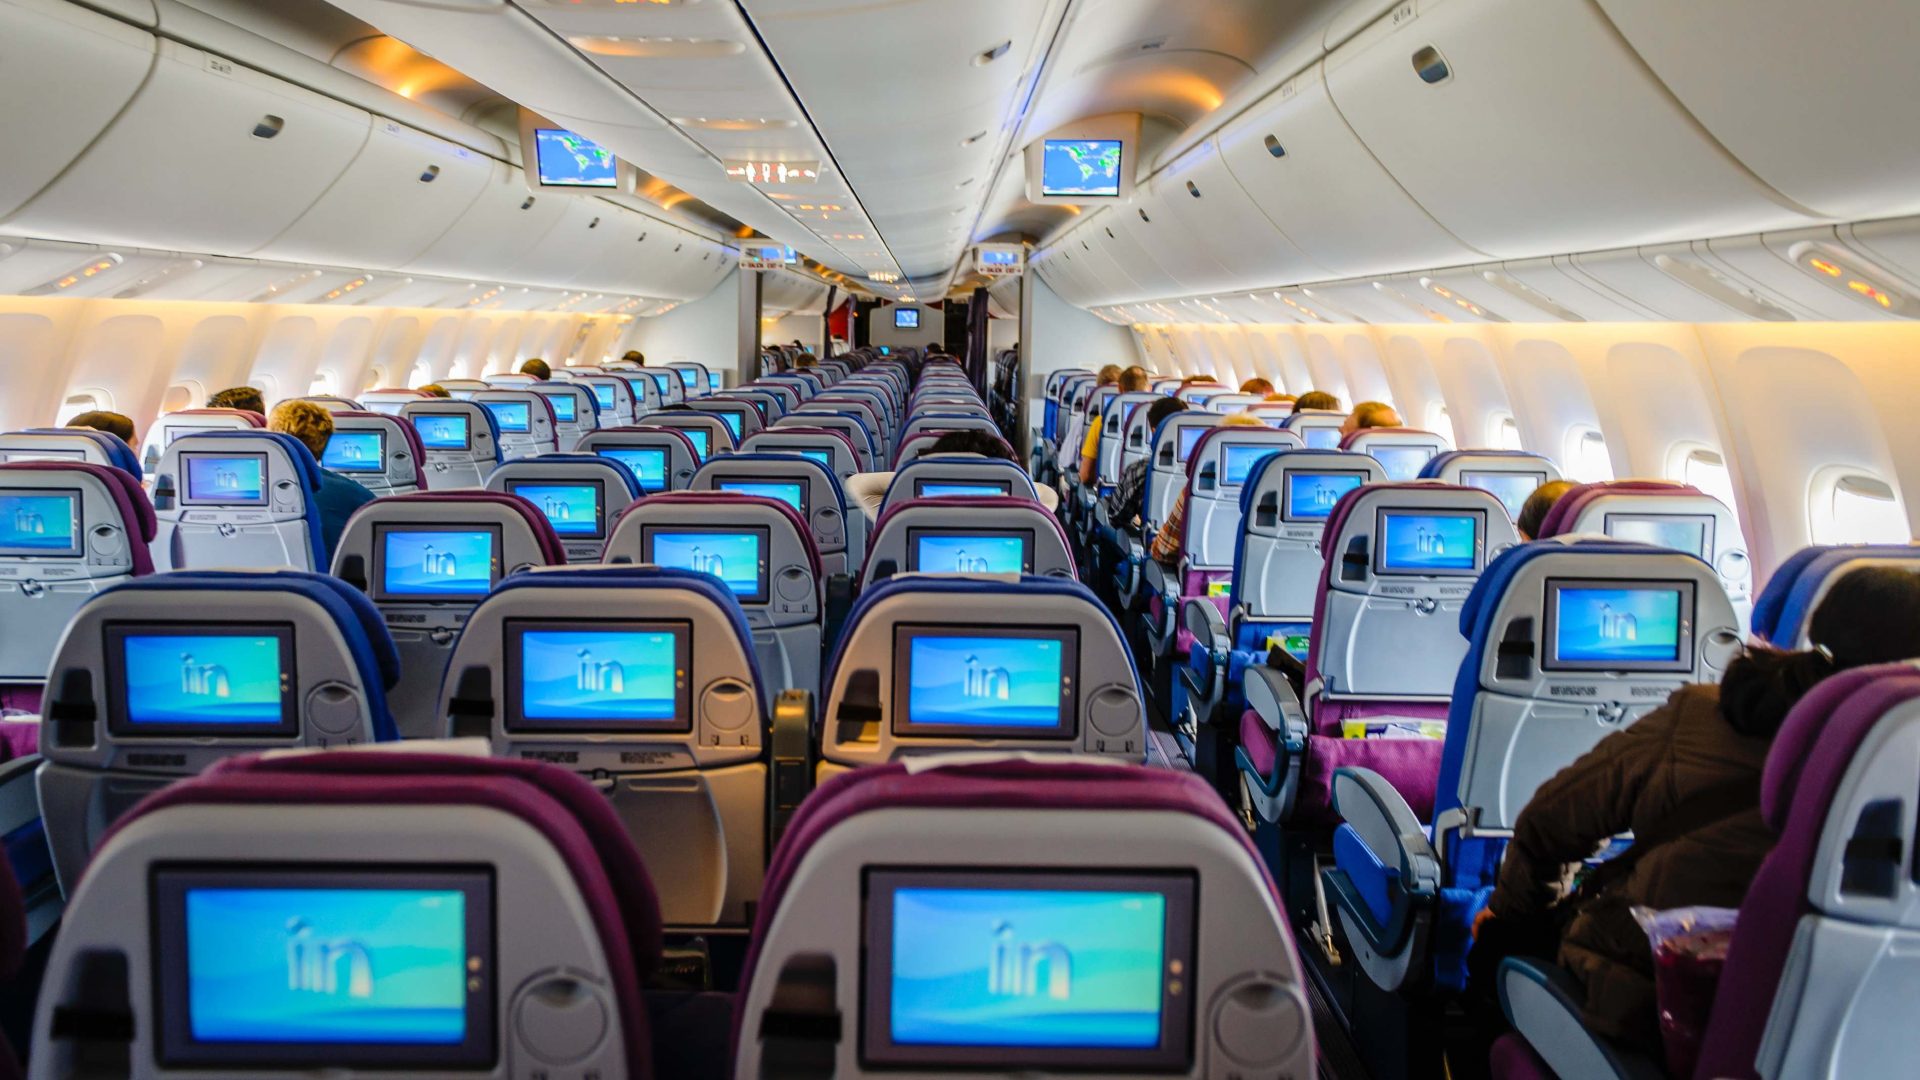 Looking down the aisle of a plane showing rows of seats and TV screens on.